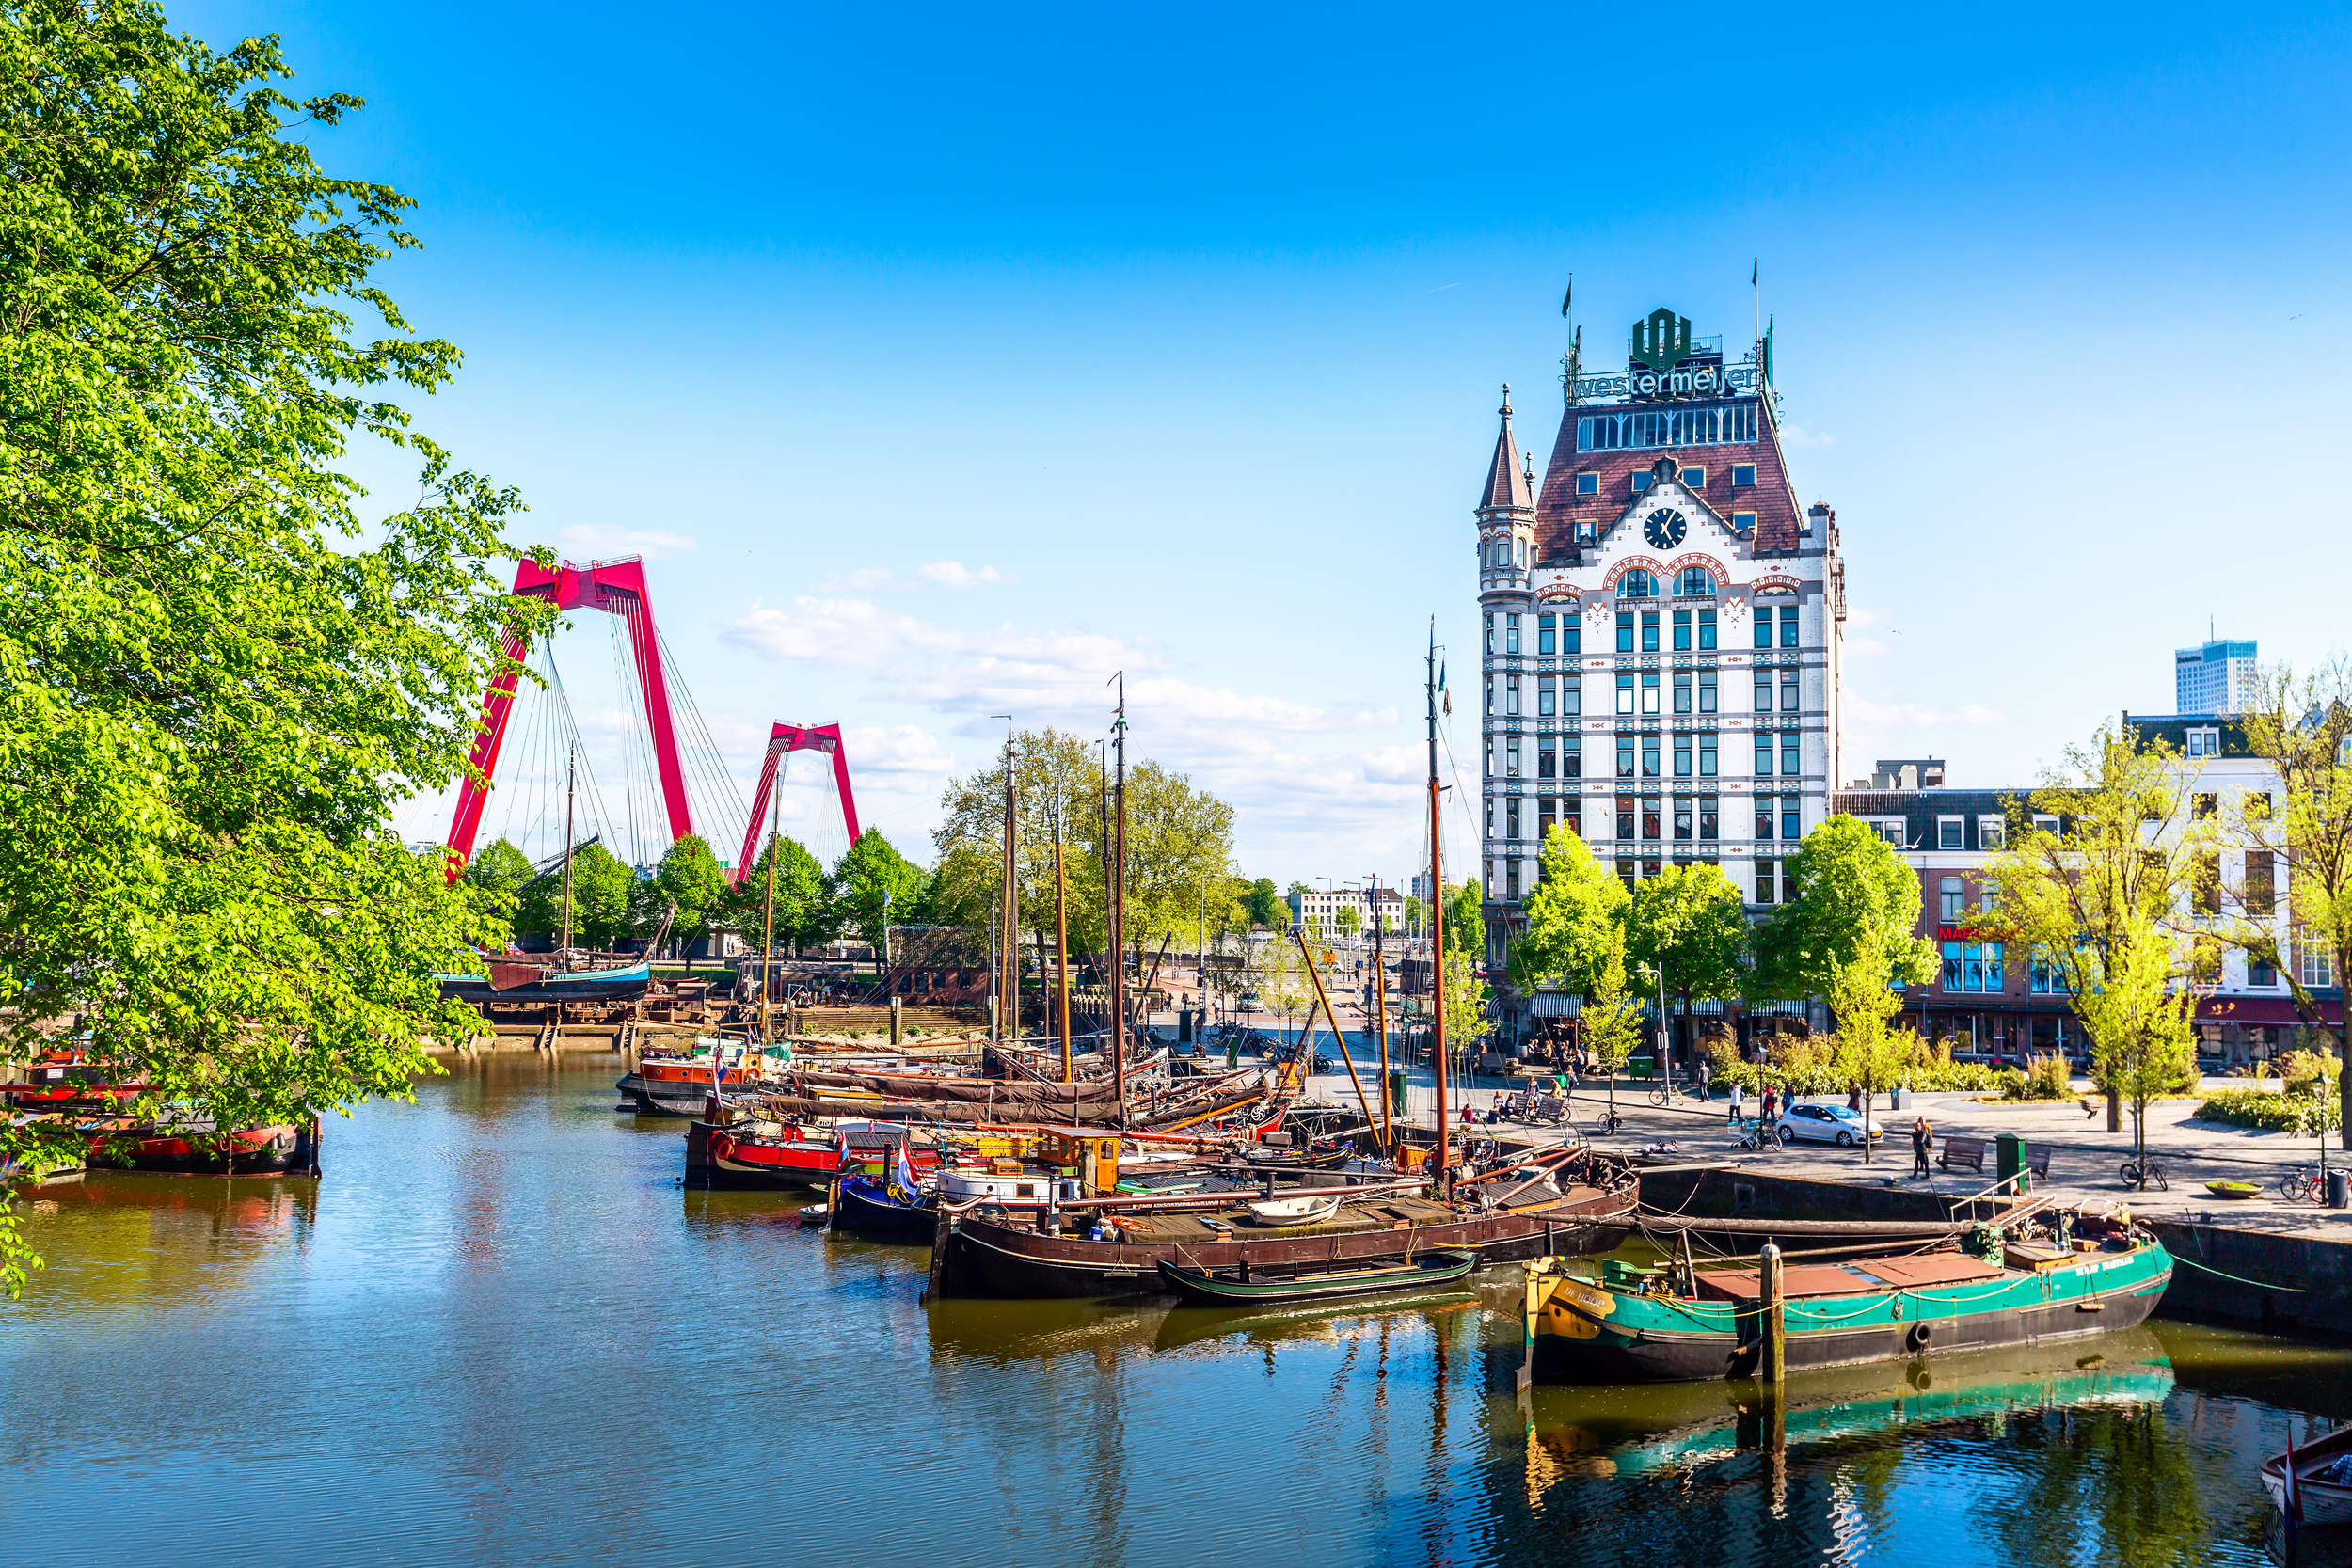 <p>If you decide to visit the Netherlands during April and May, some options exist for escaping crowds. Once you’ve had your fill of flowers, head to one of the country’s coolest and most underrated cities: Rotterdam. Have a picnic along the canal, take one of the many ferries, or have a picnic in one of the numerous parks.</p><p><a href='https://www.msn.com/en-us/community/channel/vid-cj9pqbr0vn9in2b6ddcd8sfgpfq6x6utp44fssrv6mc2gtybw0us'>Follow us on MSN to see more of our exclusive lifestyle content.</a></p>